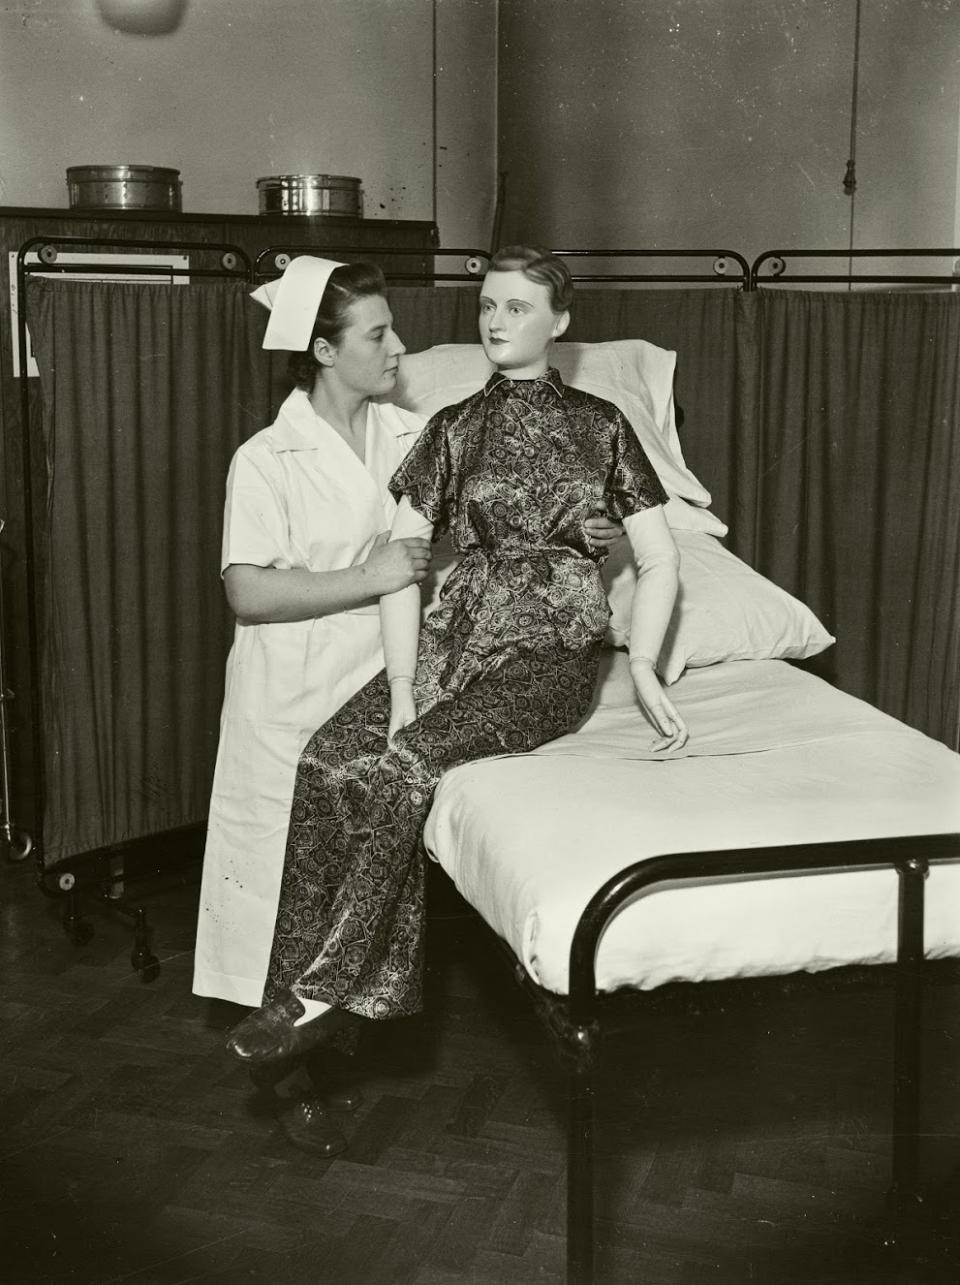 A student nurse using a jointed model patient to practise assisting a patient to get out of bed, in the Preliminary Training School at Central Middlesex County Hospital